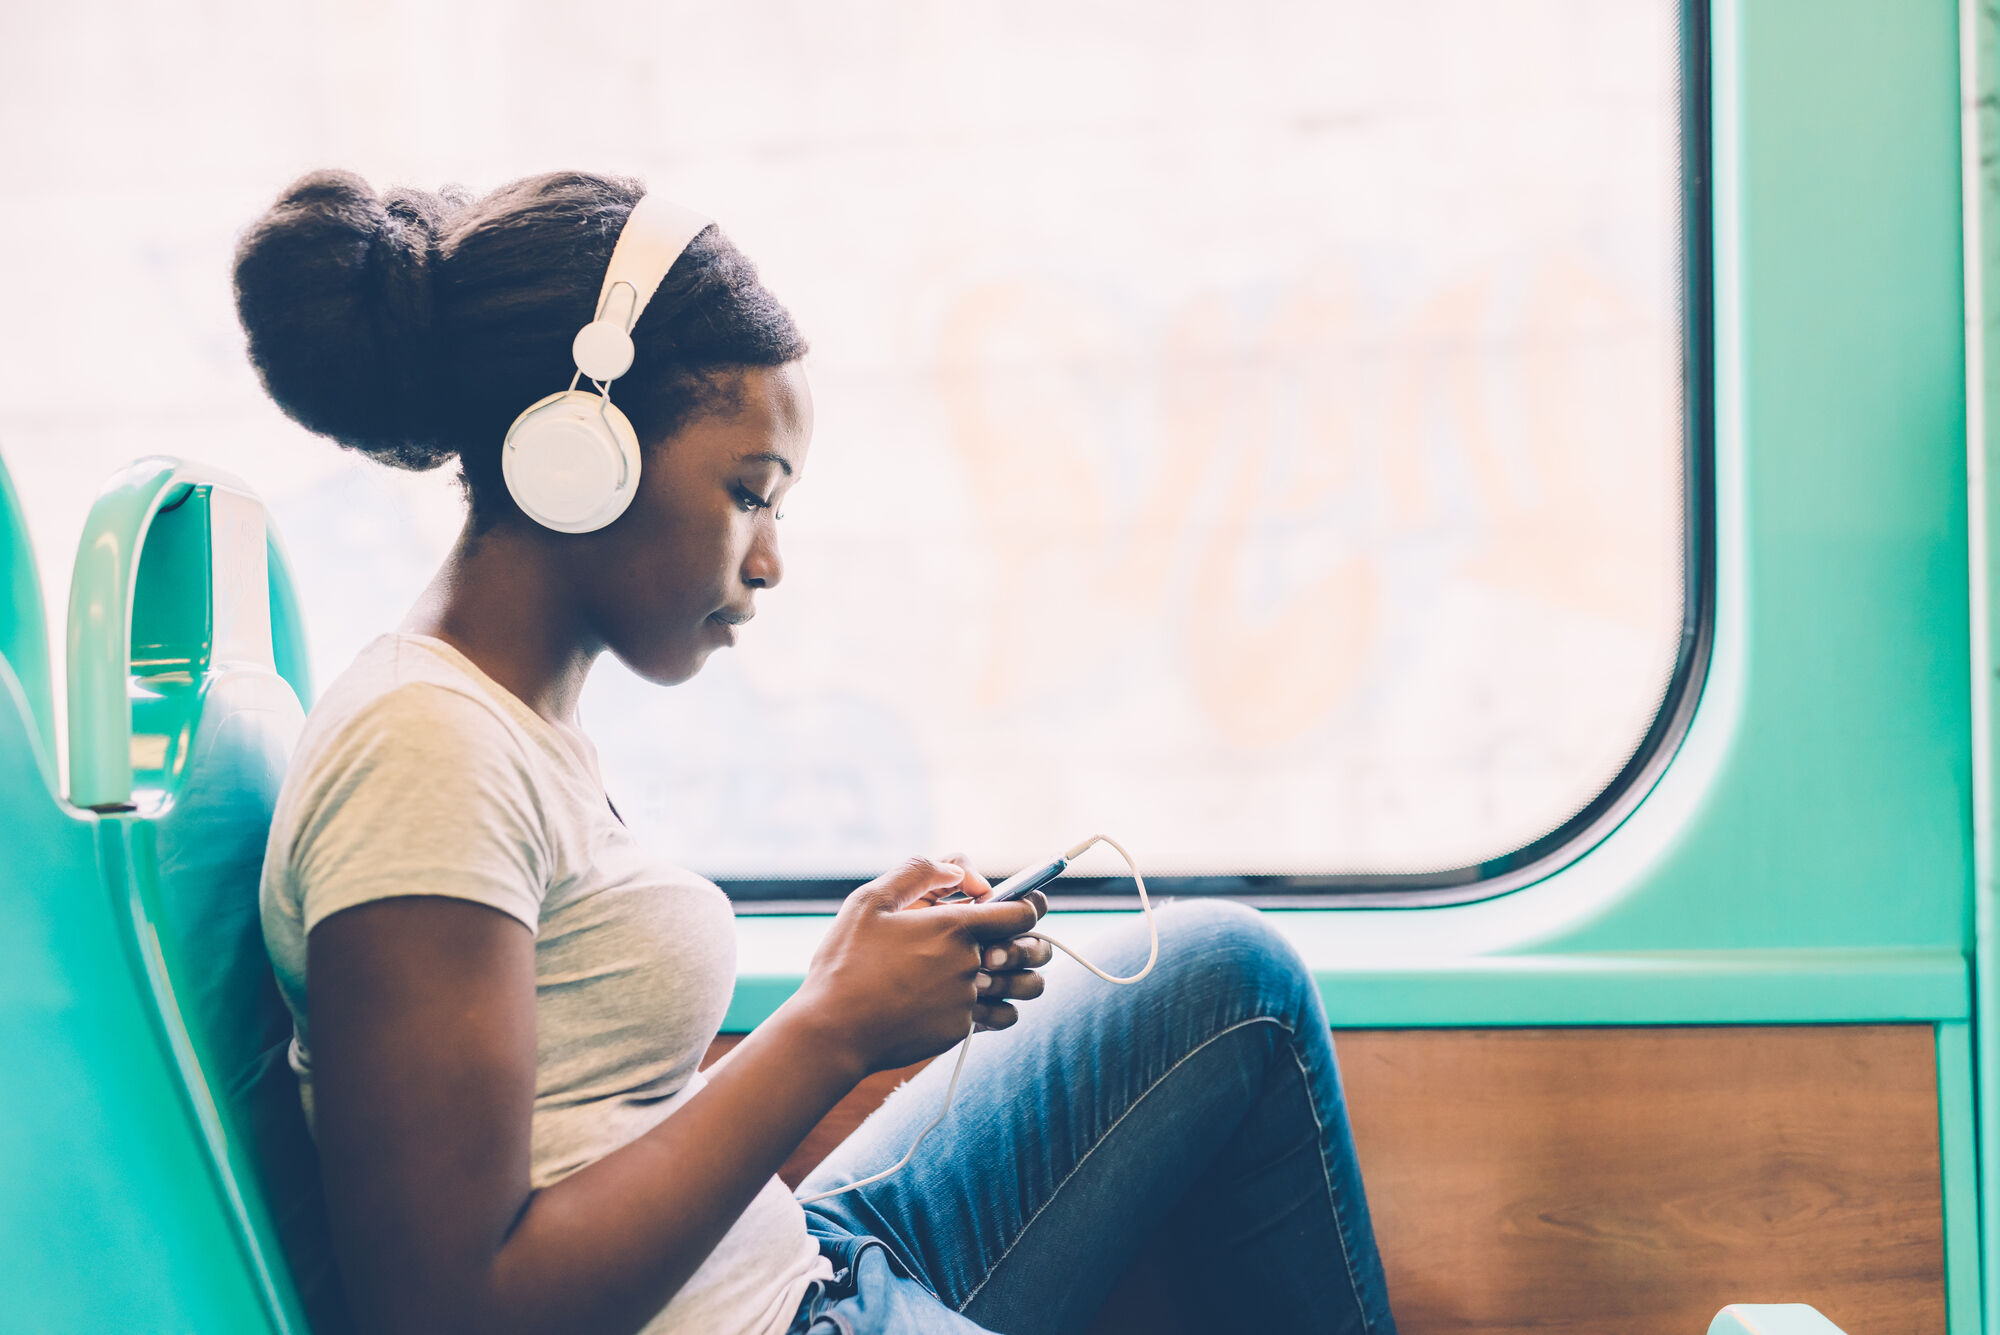 Girl on bus listening to music